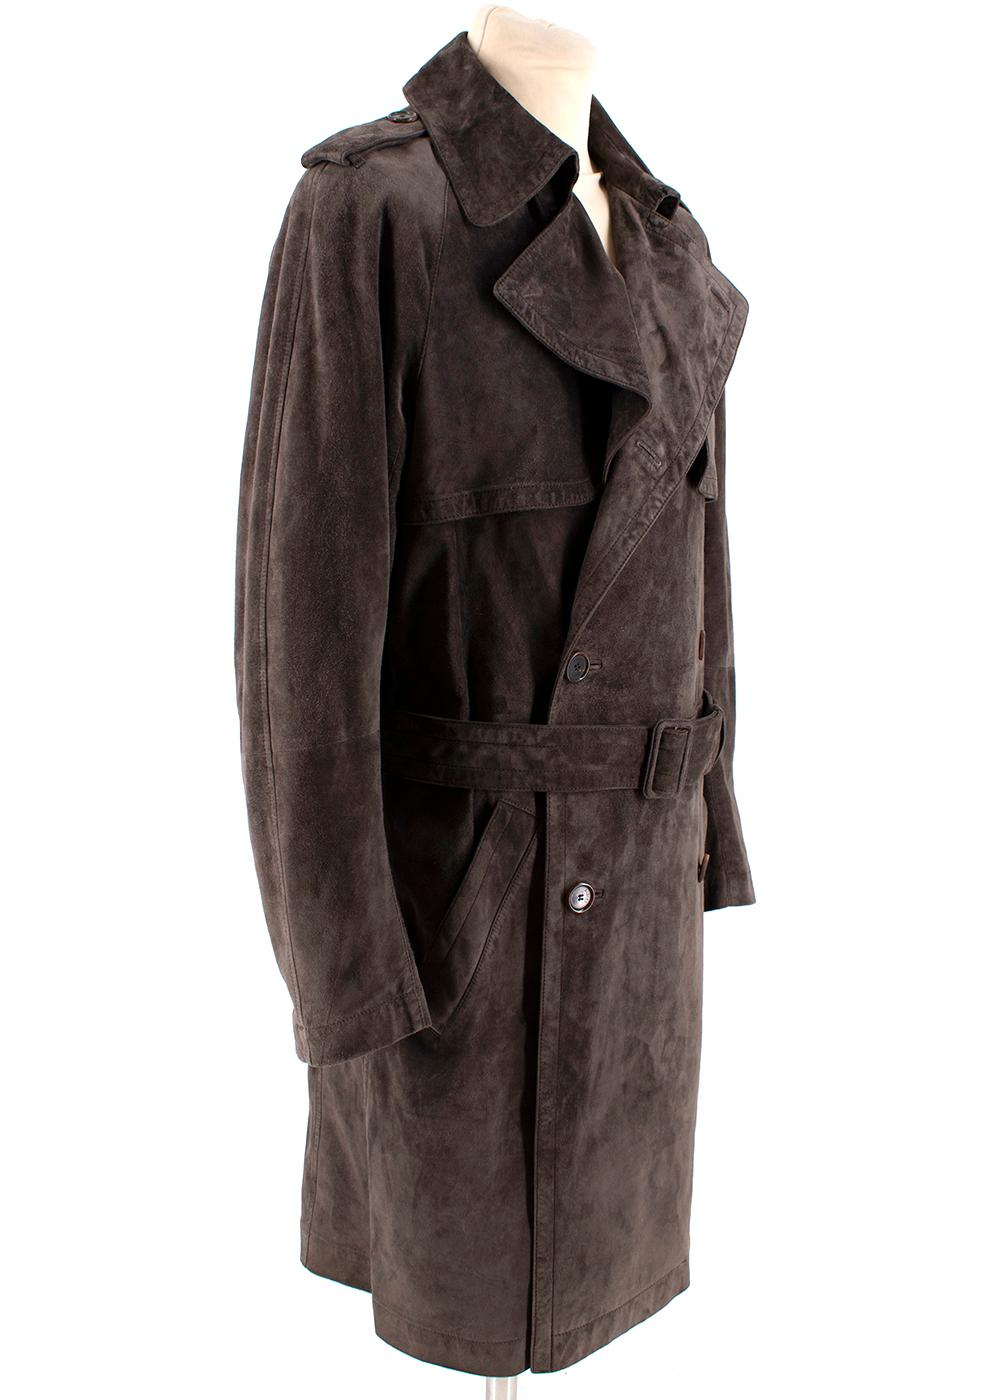 Asprey London Brown Trench Coat Mens

- IT 48
- Silver hook chain hardware
- Belted at the waist
- Tortoise shell buttons on the shoulders
- Relaxed look
- Brown soft suede outer-shell 
- Leather brown lining 
- Trans-seasonal design 

Measurements